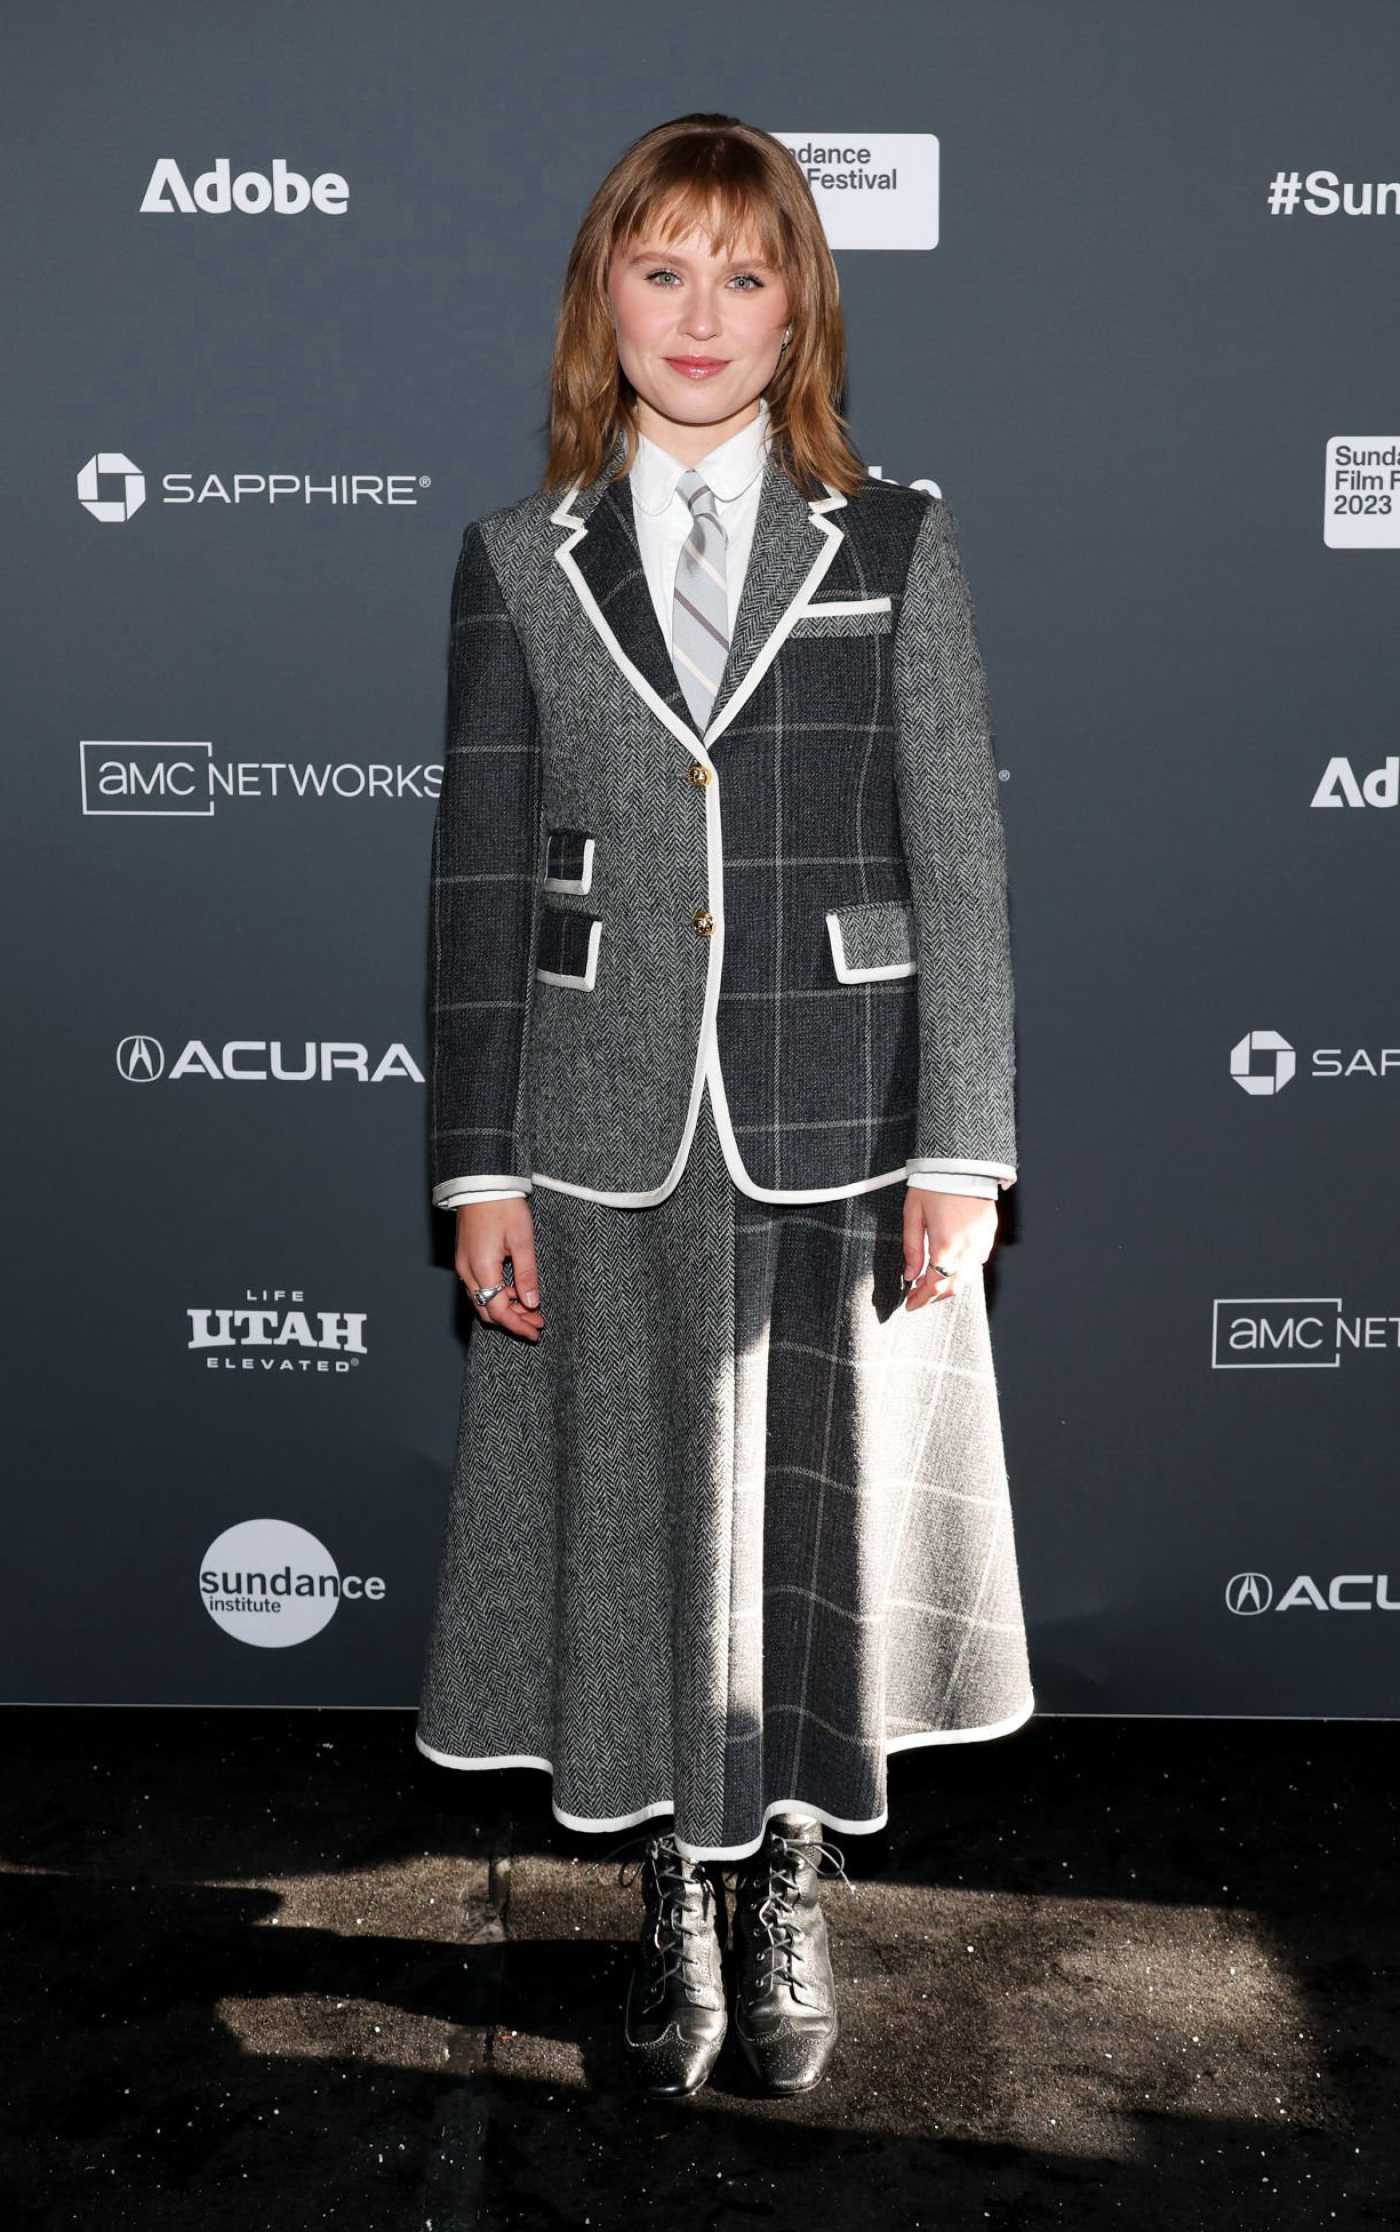 Eliza Scanlen Attends The Starling Girl Premiere During 2023 Sundance Film Festival in a Park City 01/21/2023